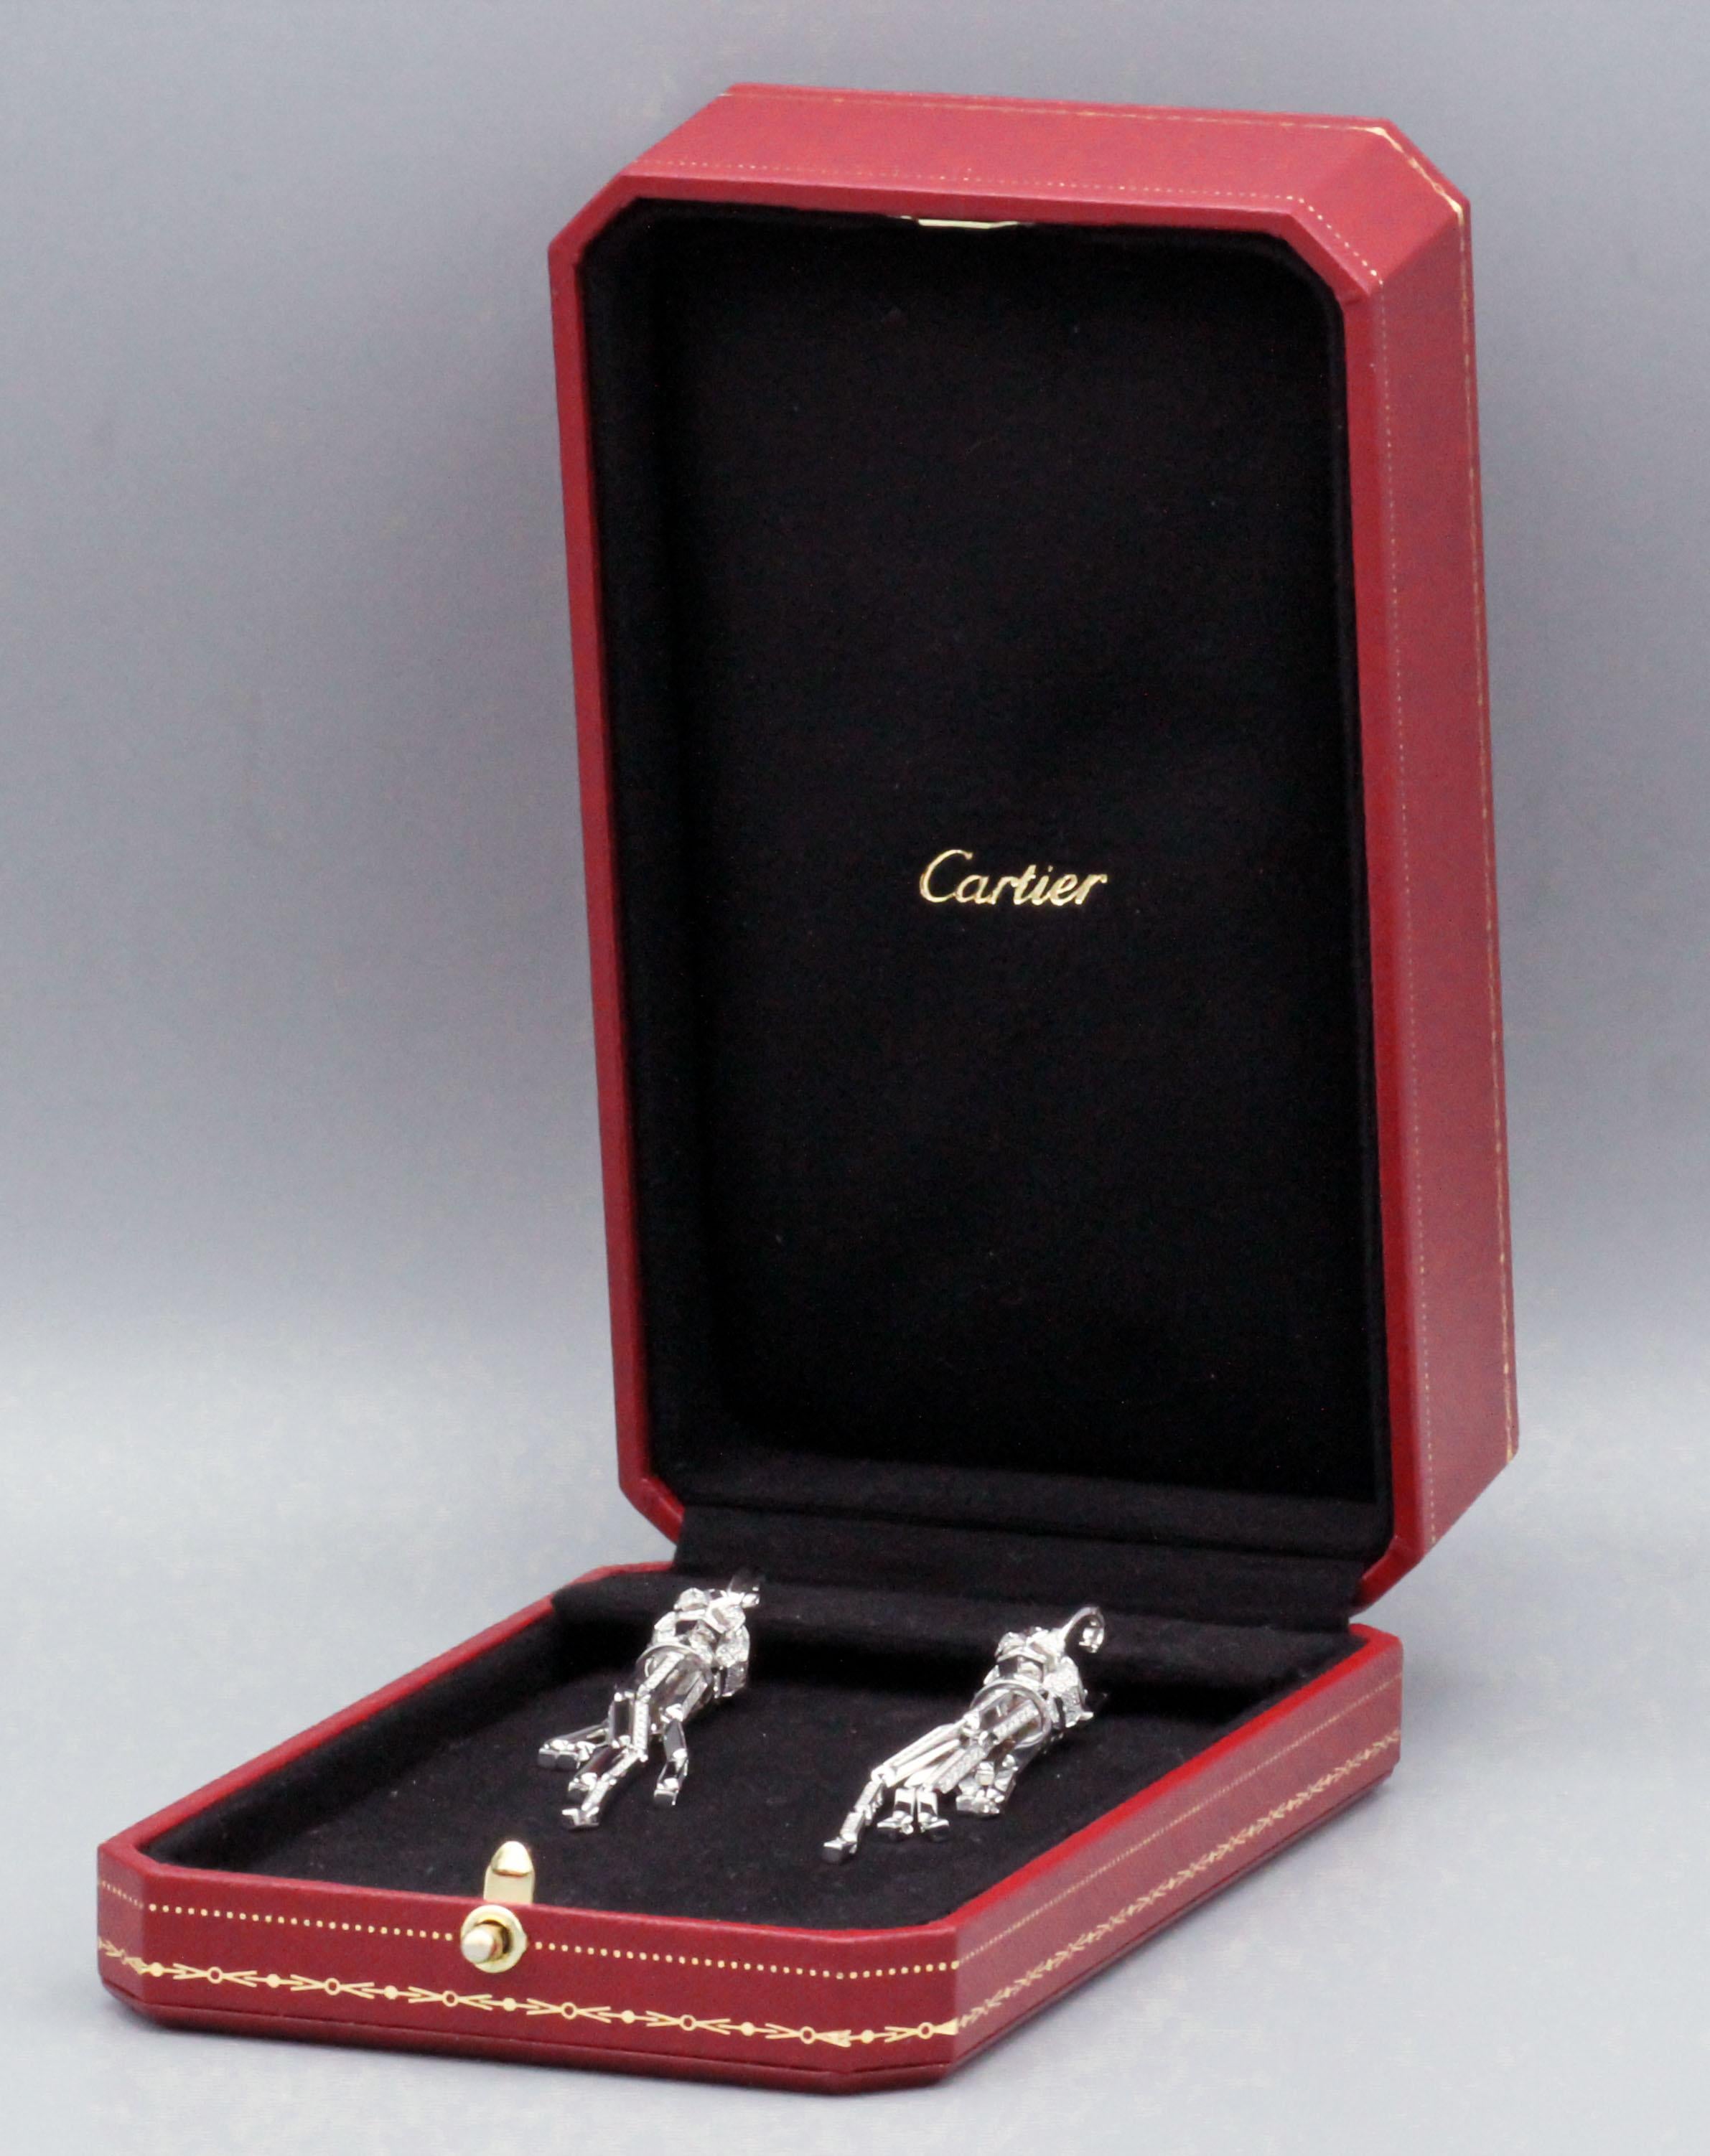 Very fine pair of pendant earrings from the 